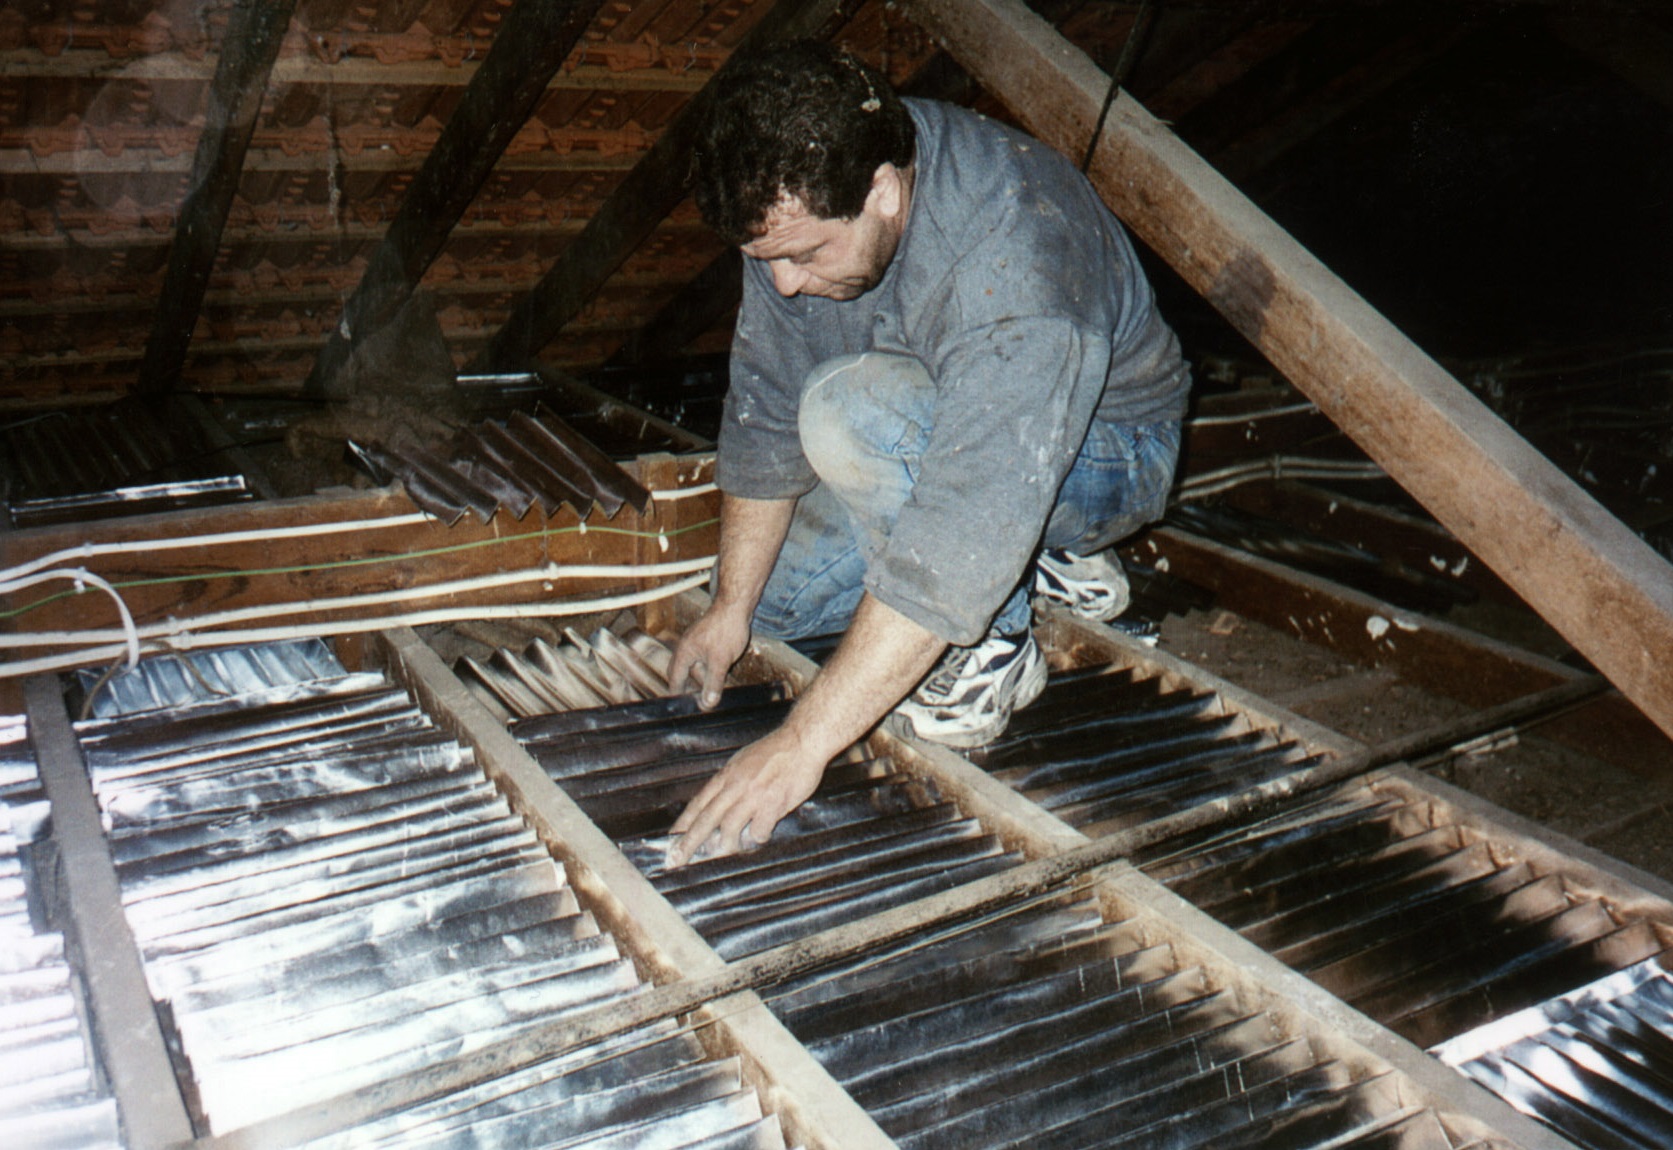 joists visible